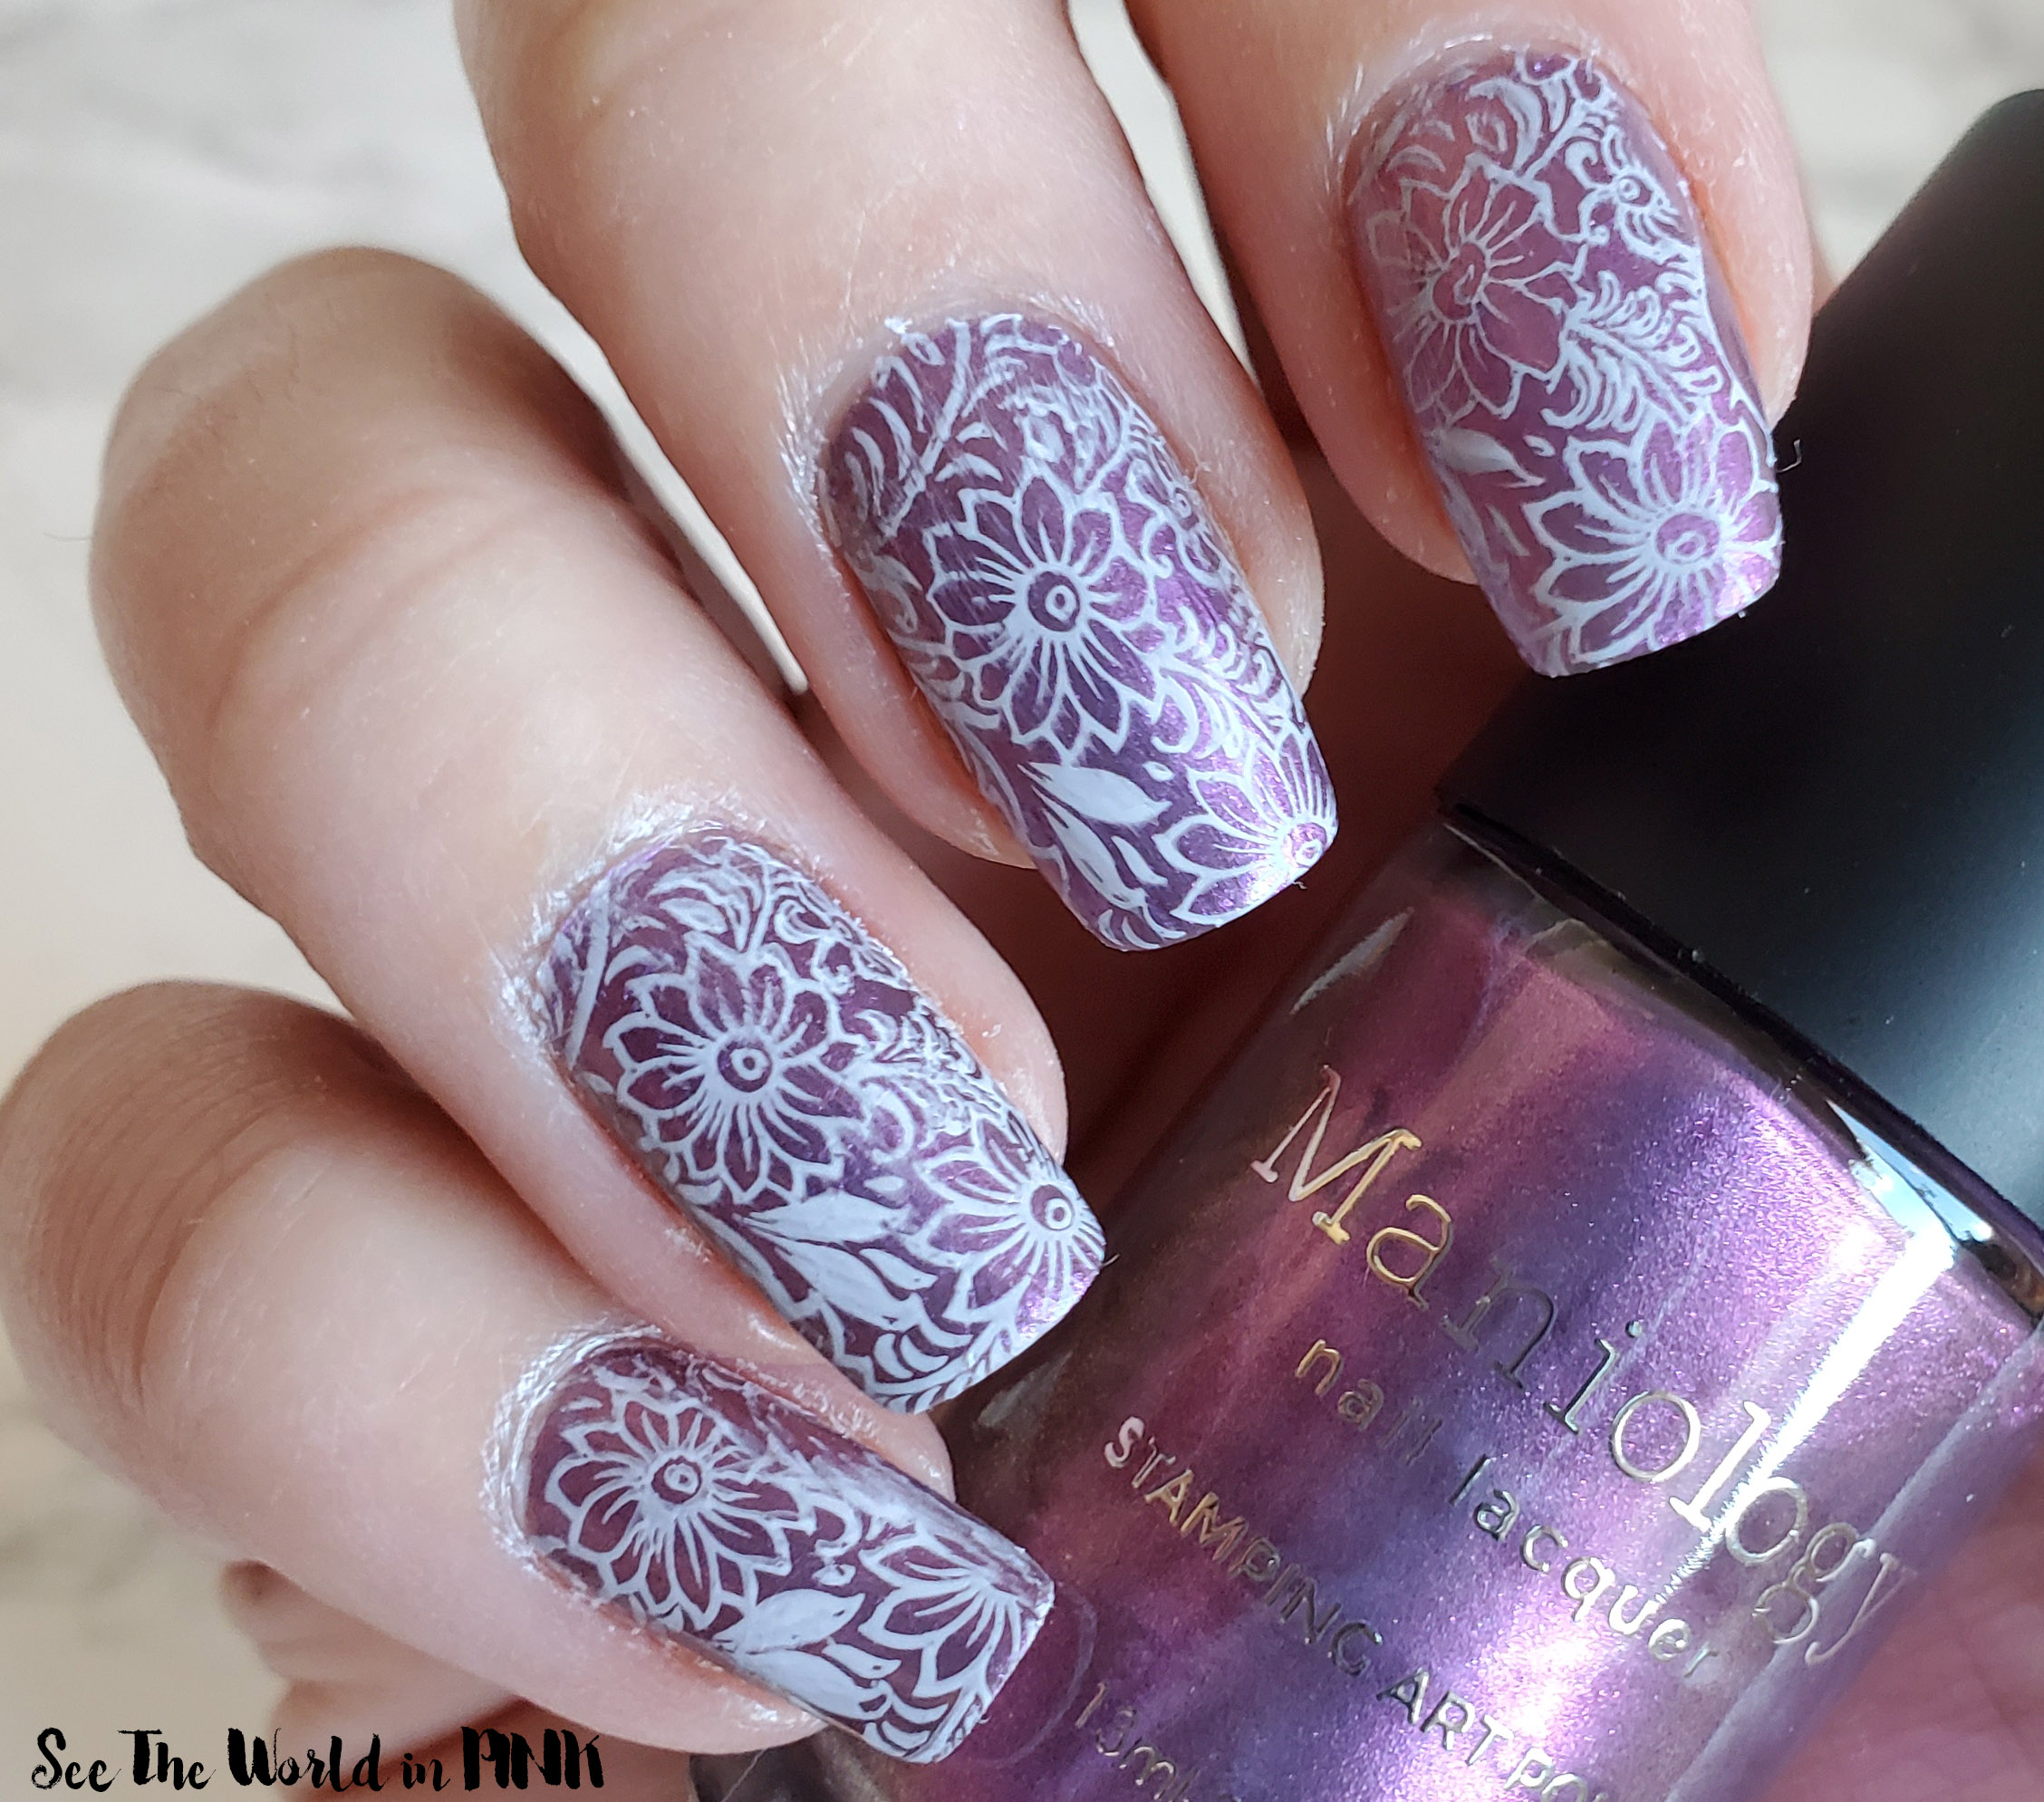 Manicure Monday - Purple Flower Stamped Nails